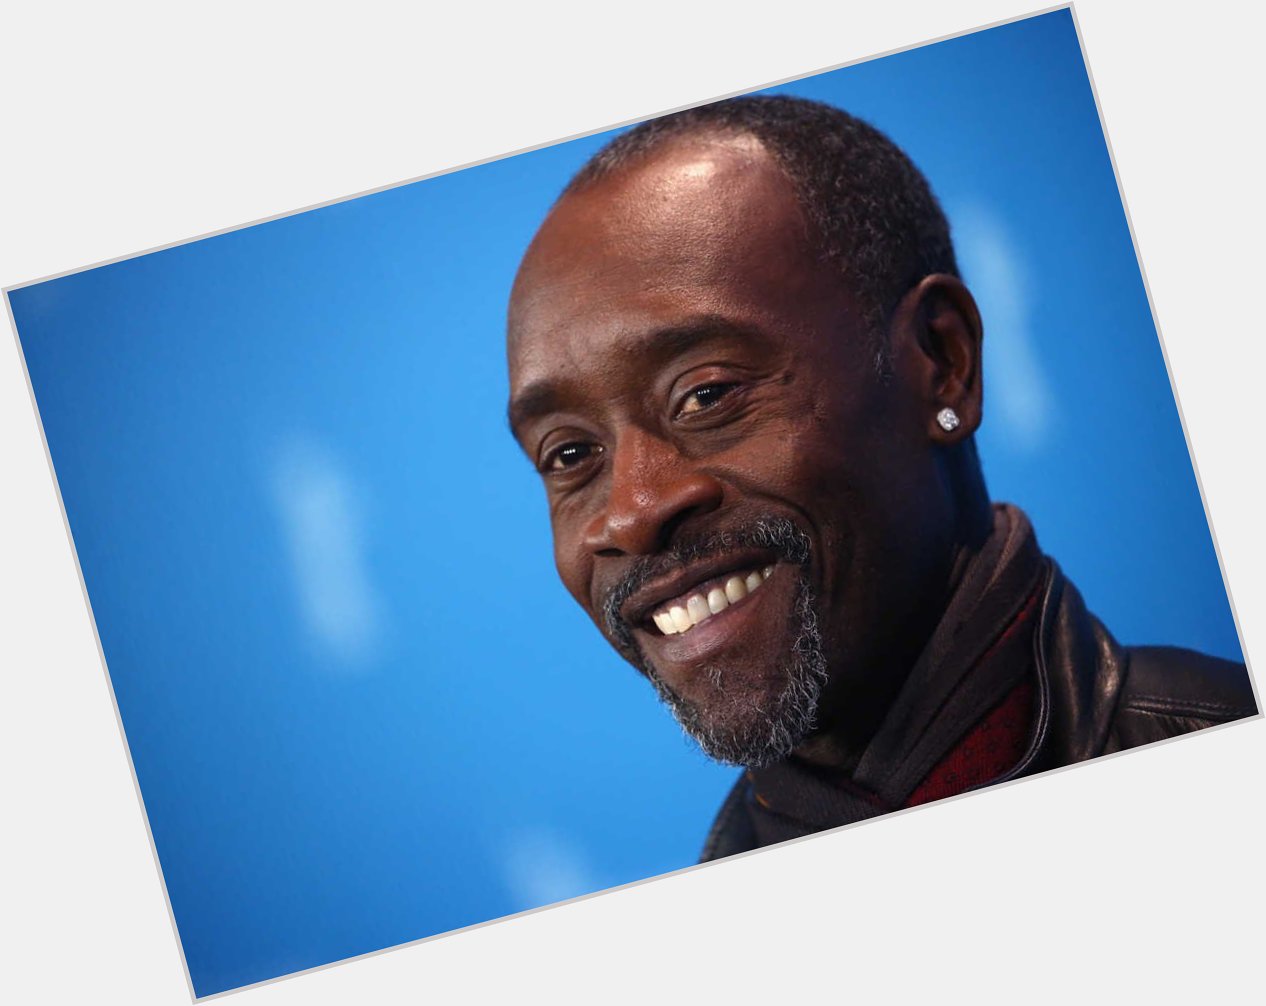 Happy birthday to the war machine Don Cheadle !!!
Great actor
happy 57 !! 